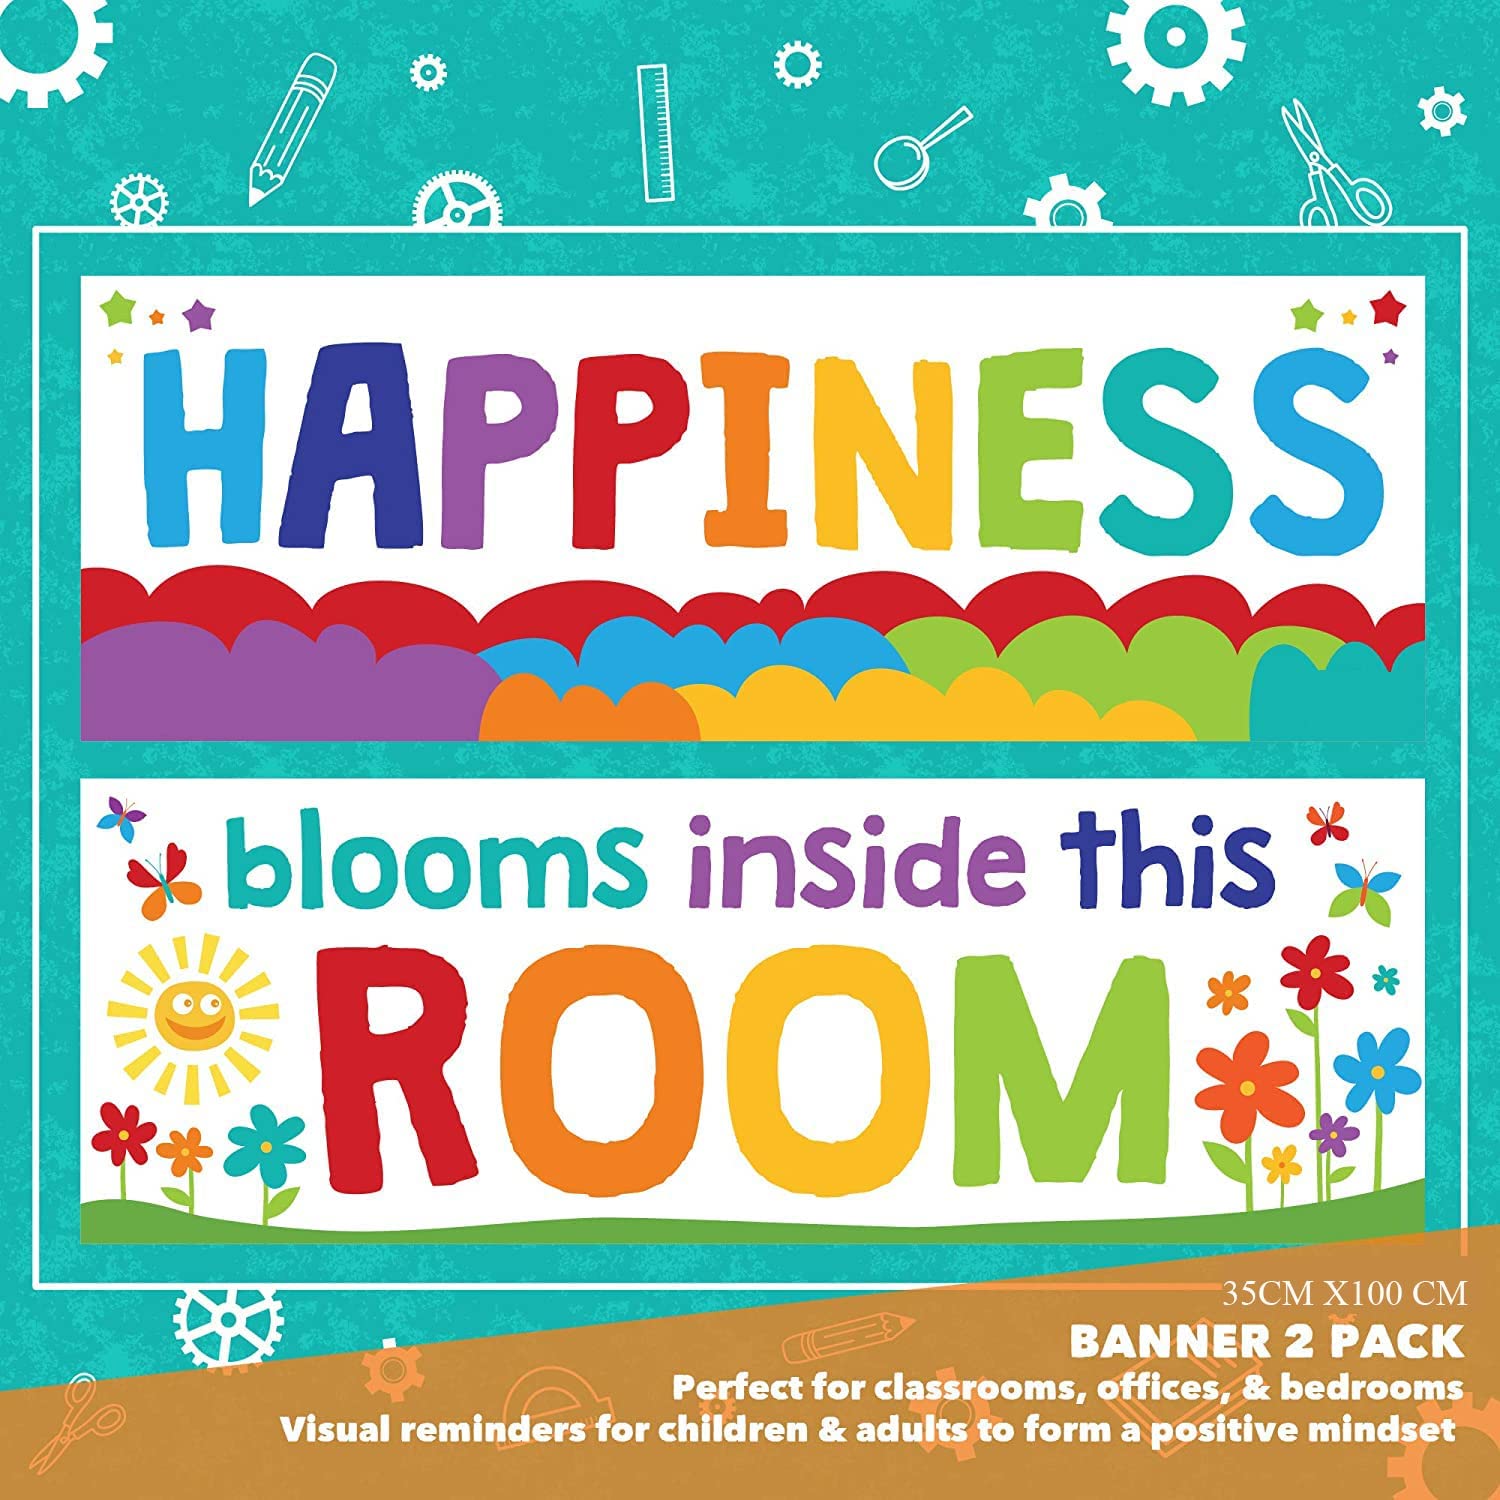 Classroom decoration poster with motivational phrases